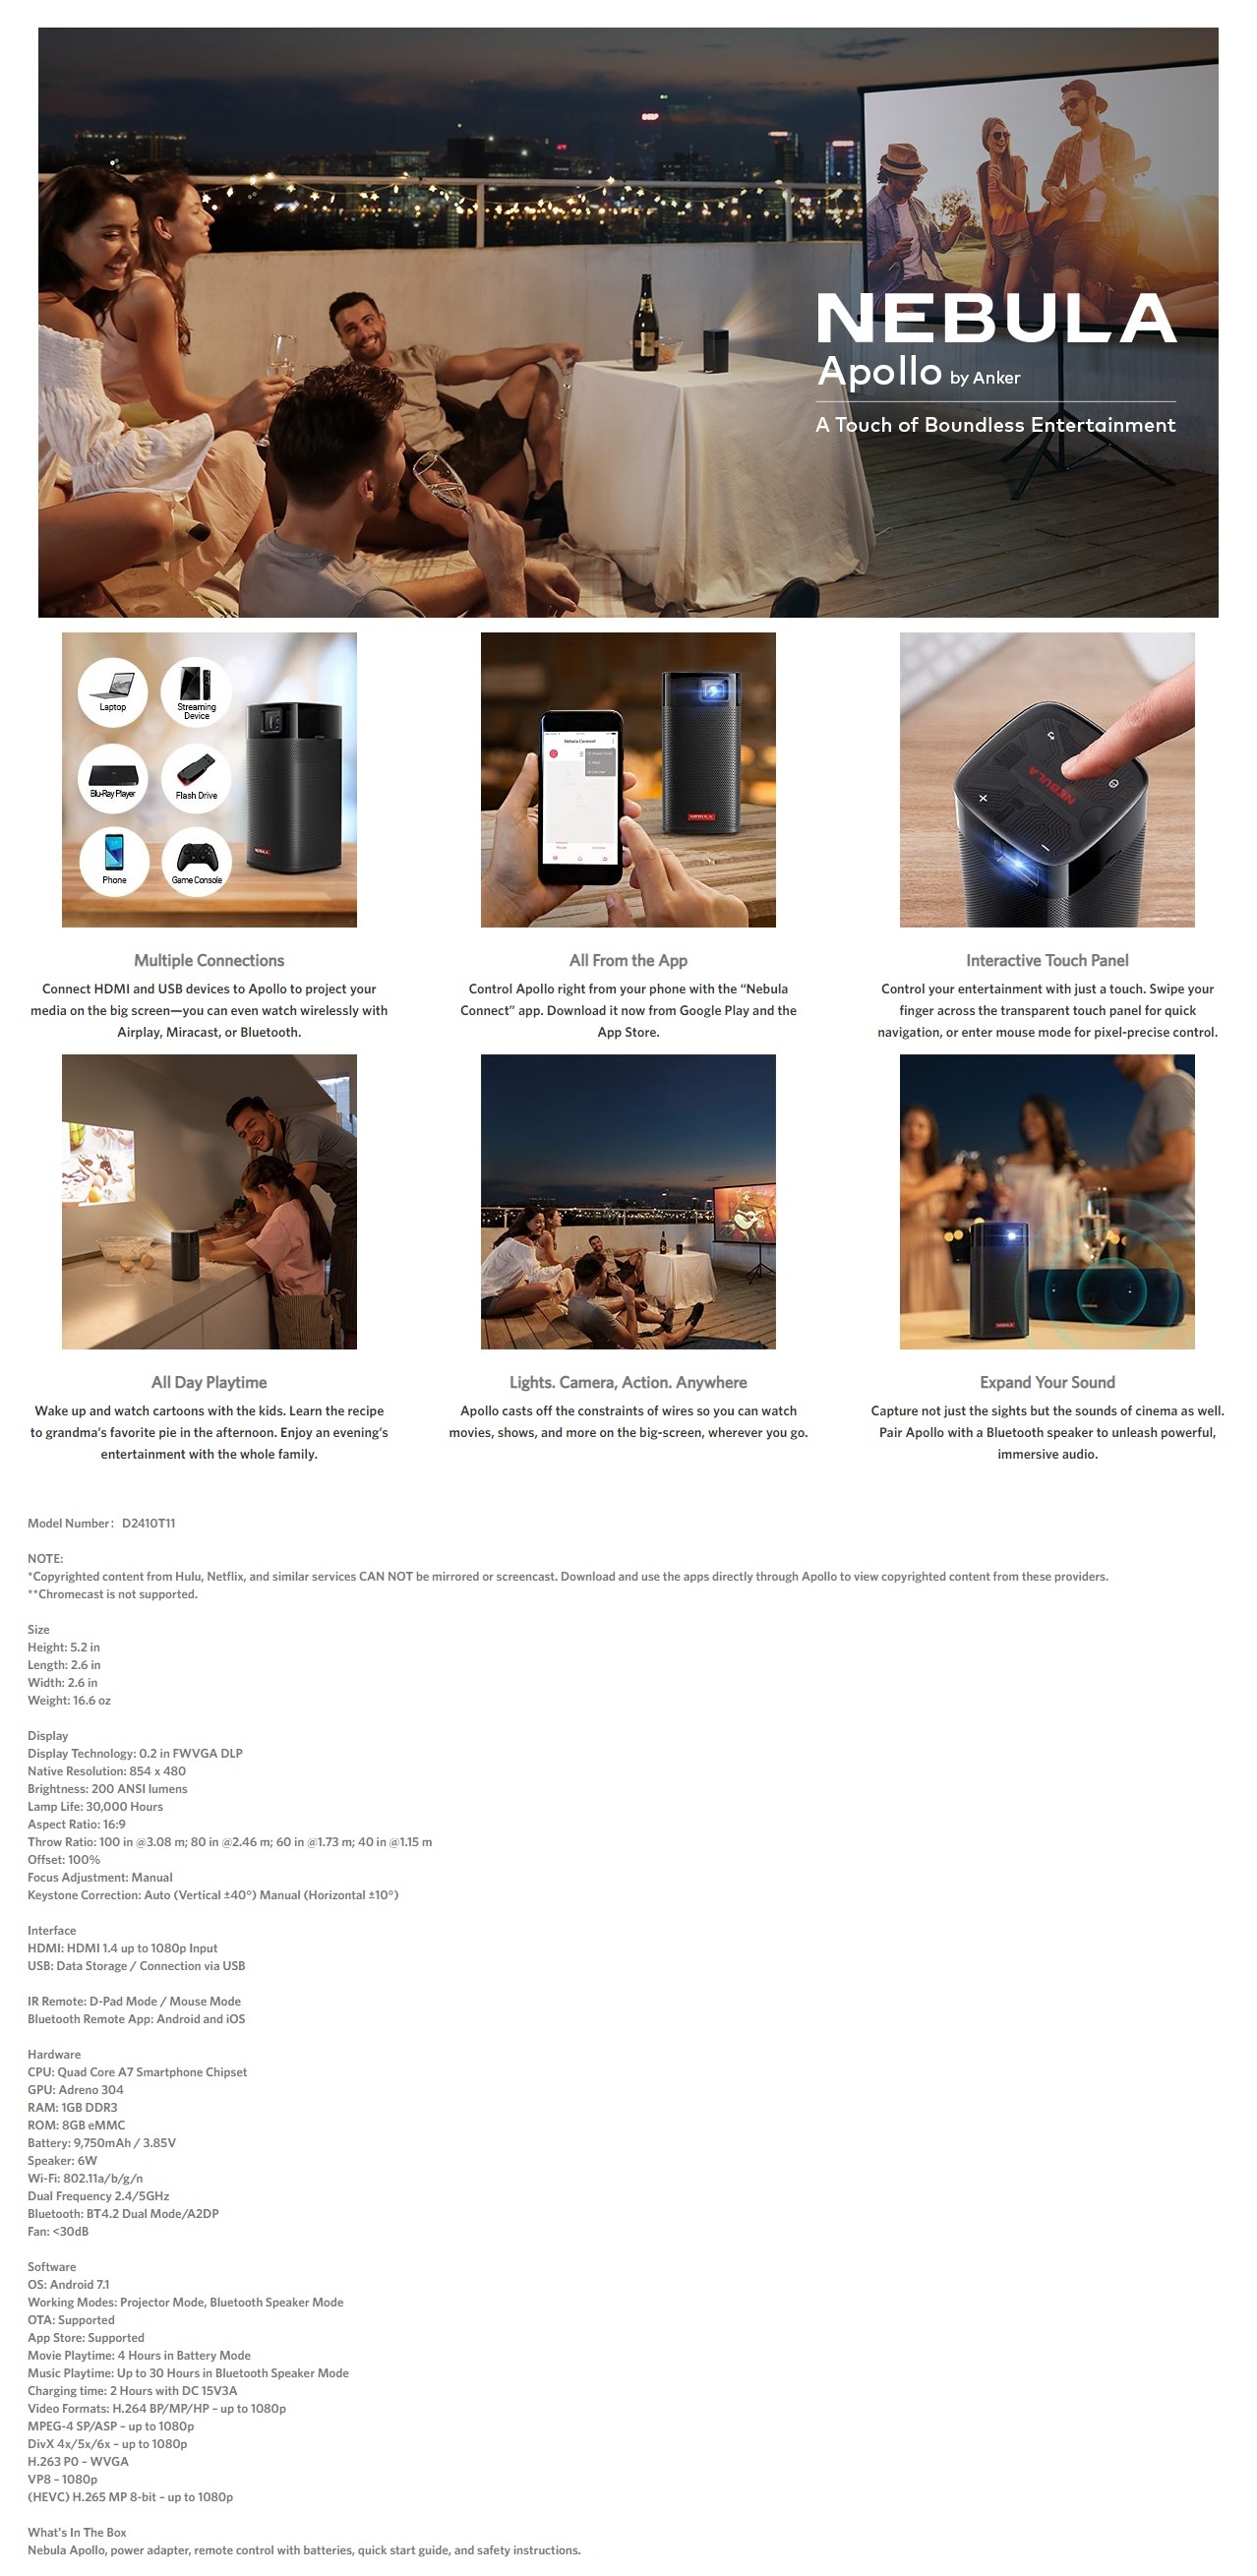 A large marketing image providing additional information about the product Nebula Apollo Portable Mini Projector - Additional alt info not provided